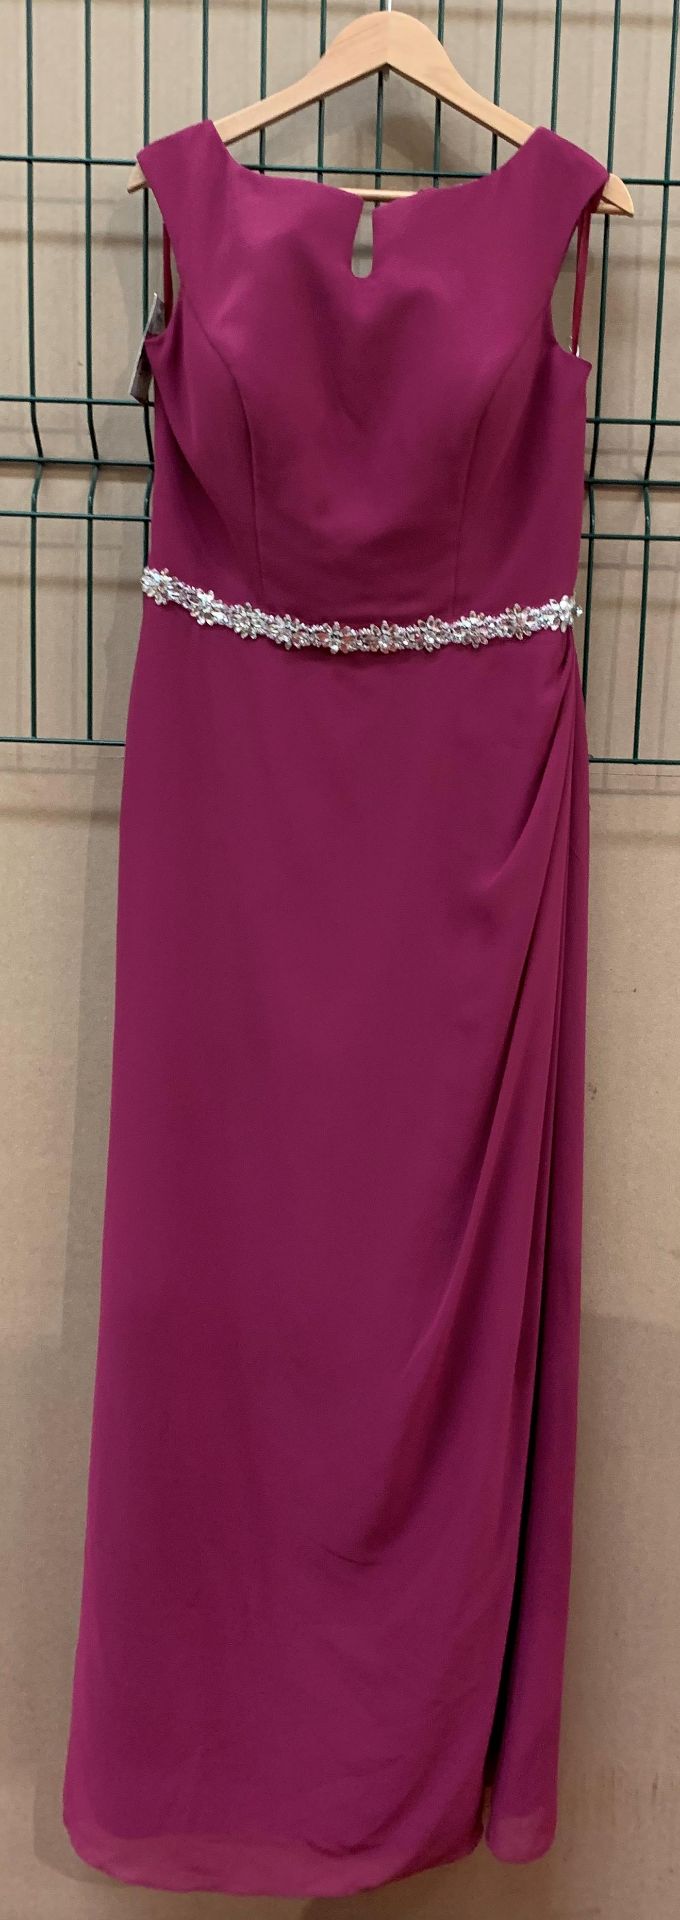 A bridesmaid/prom dress and stole by Serenade, Ivory, orchid, size 18,